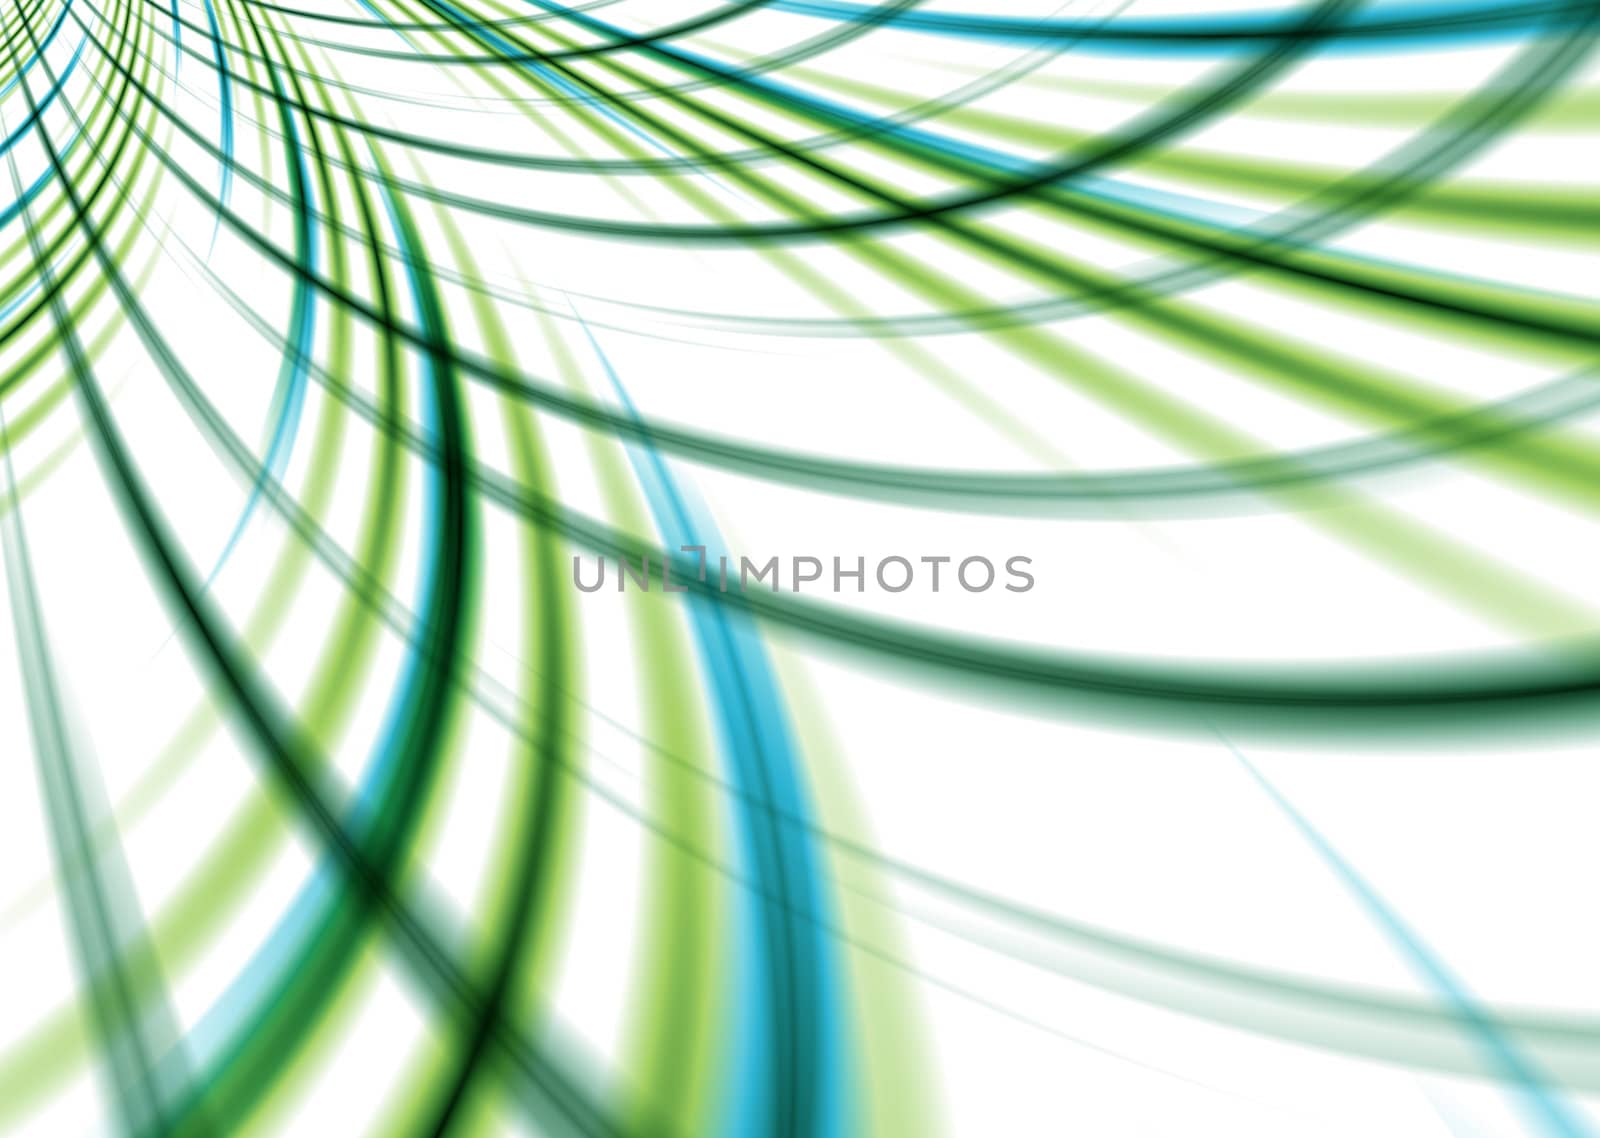 Abstract woven background with intersecting lines in green and blue